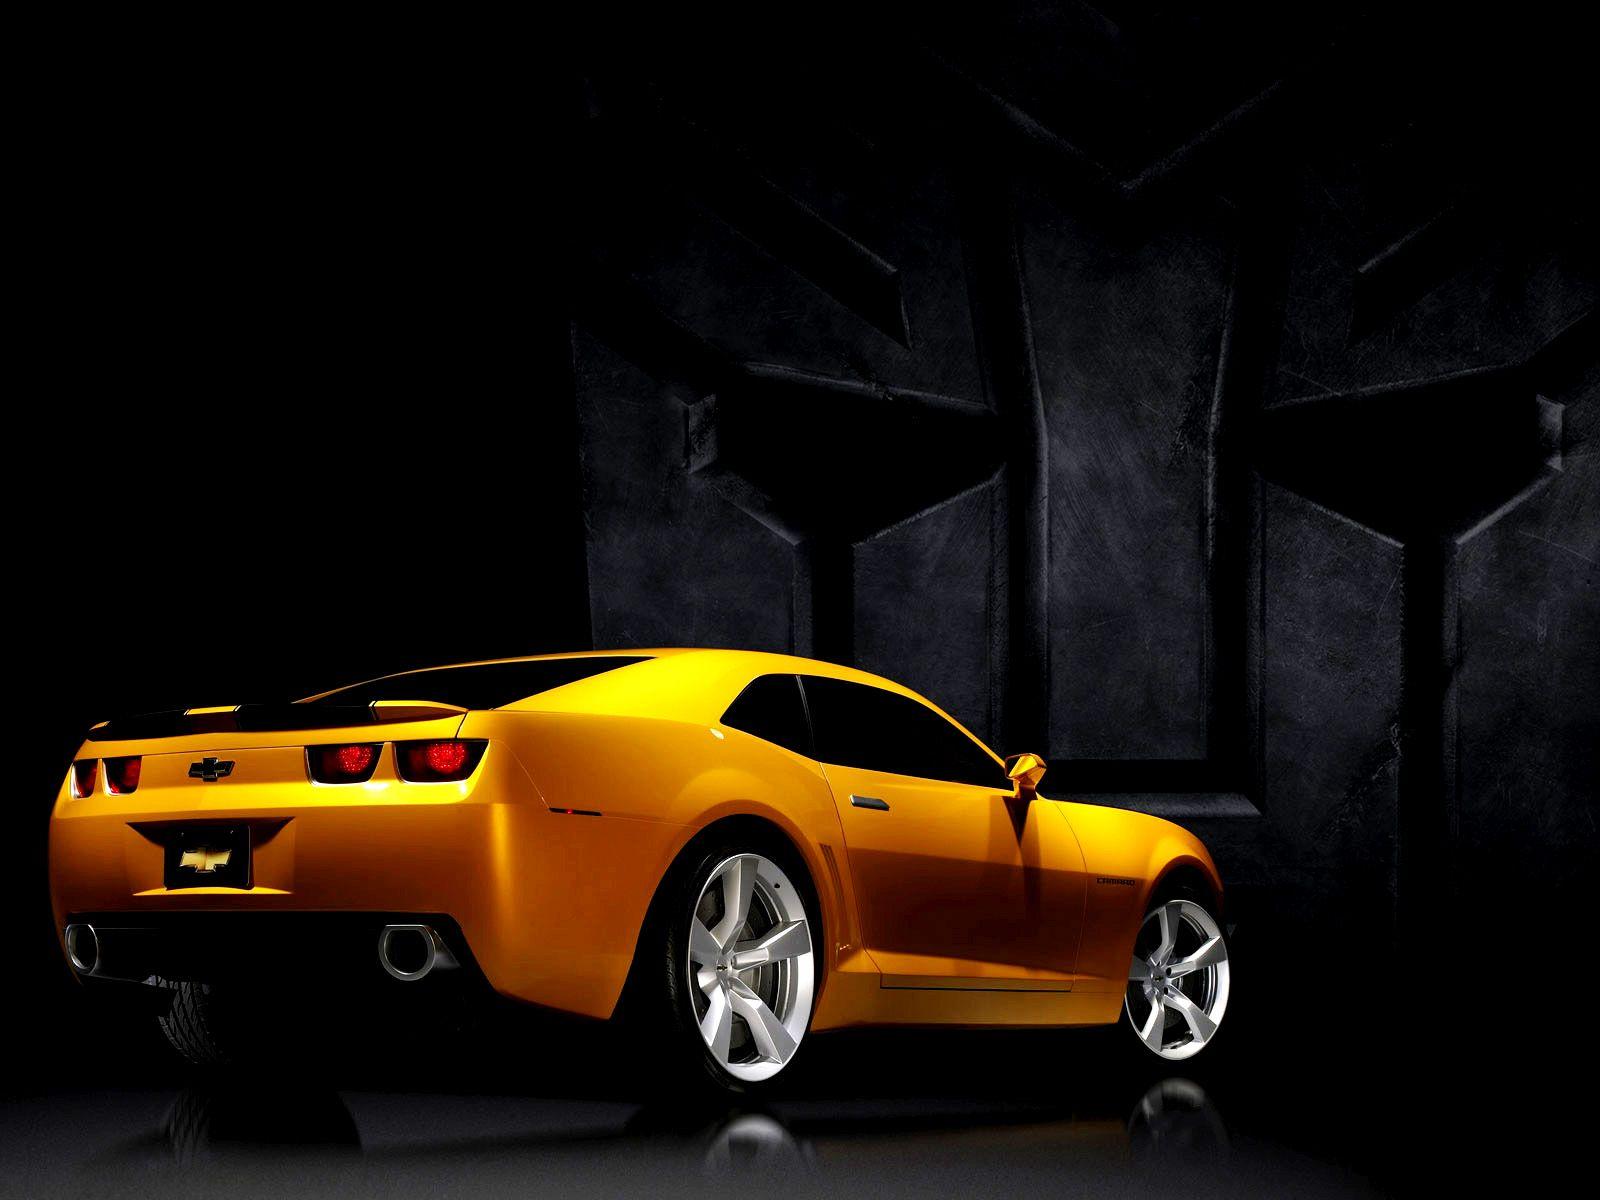 Image detail for -Bumblebee Transformers HD Wallpaper Download Free